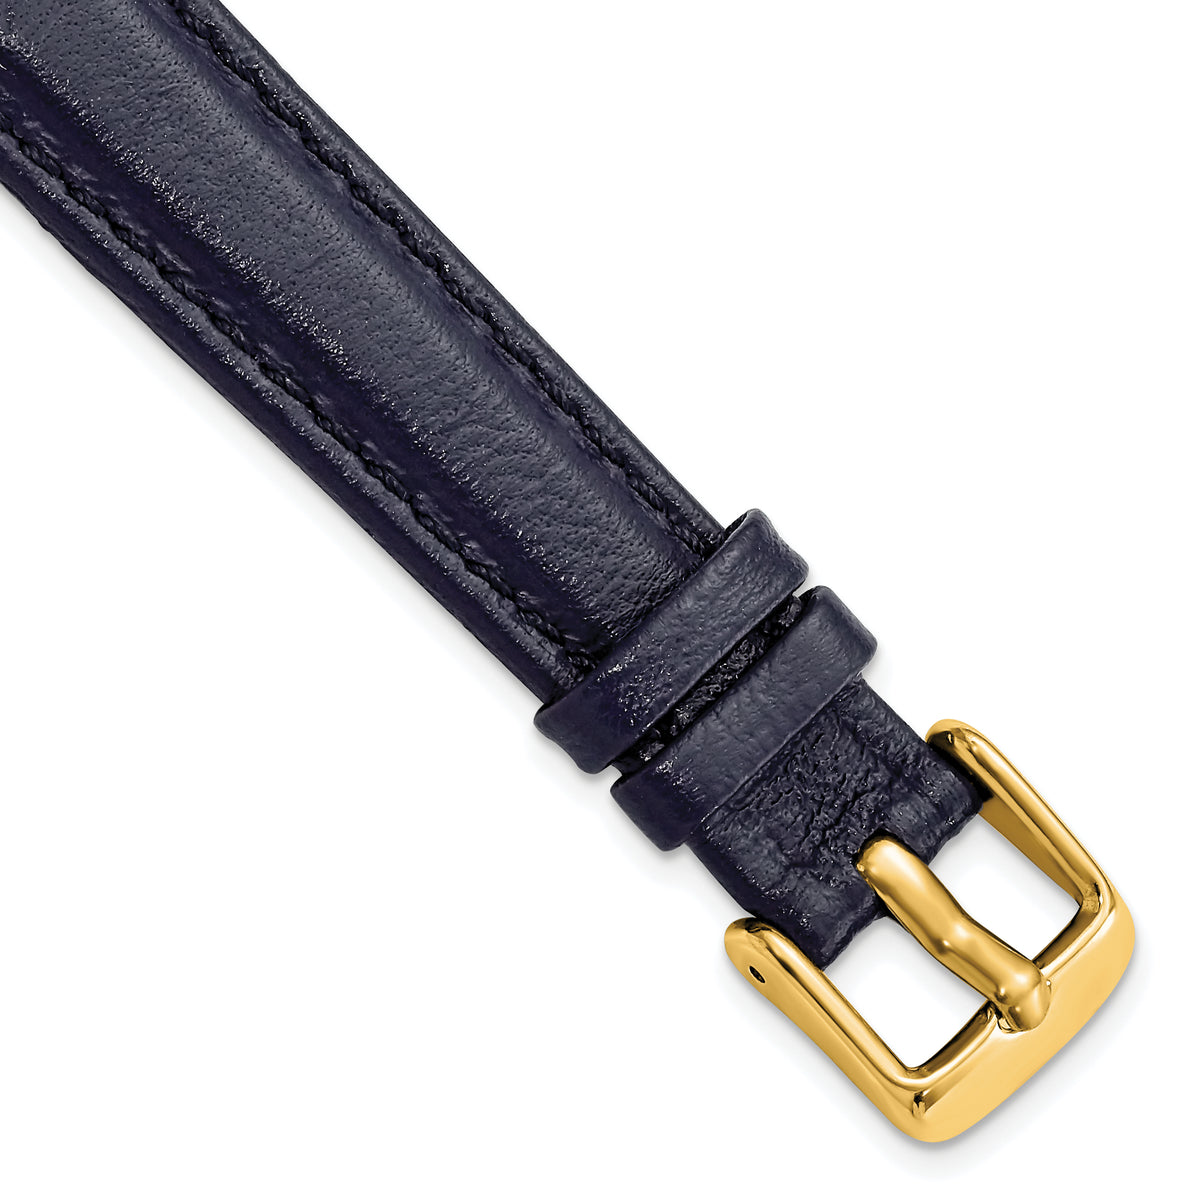 DeBeer 14mm Navy Glove Leather with Gold-tone Panerai Style Buckle 6.75 inch Watch Band